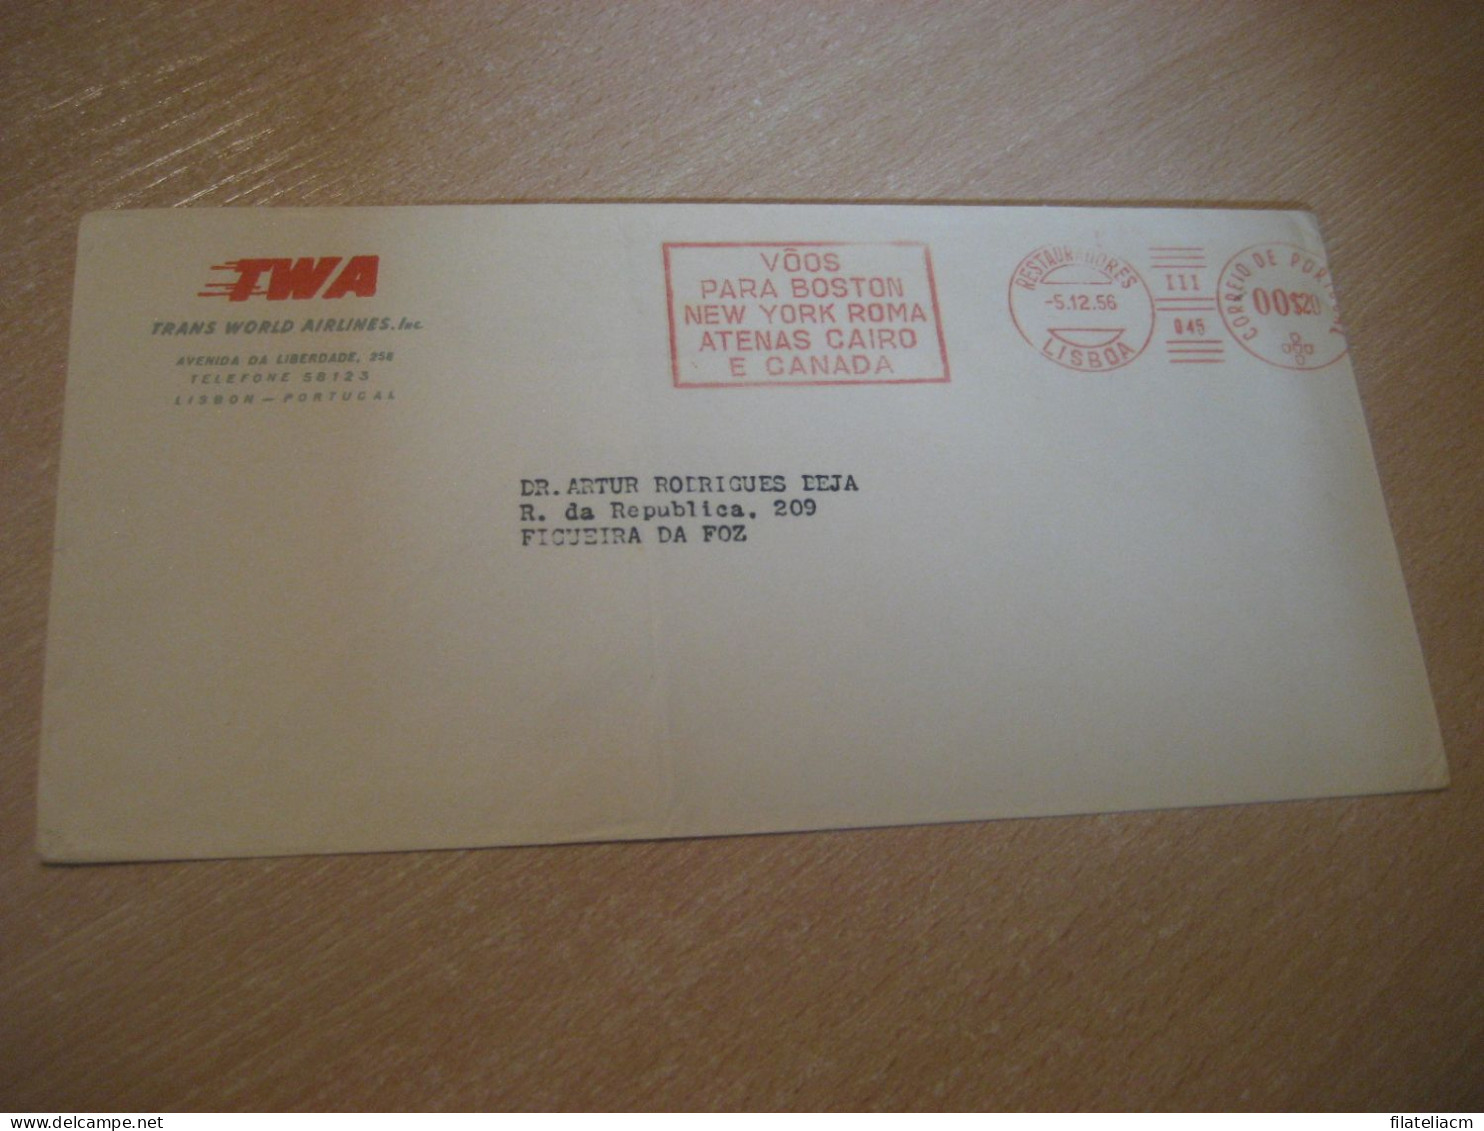 LISBOA 1956 To Figueira Da Foz TWA Airline Trans World Airlines Voos Flight Meter Mail Cancel Cover PORTUGAL - Covers & Documents